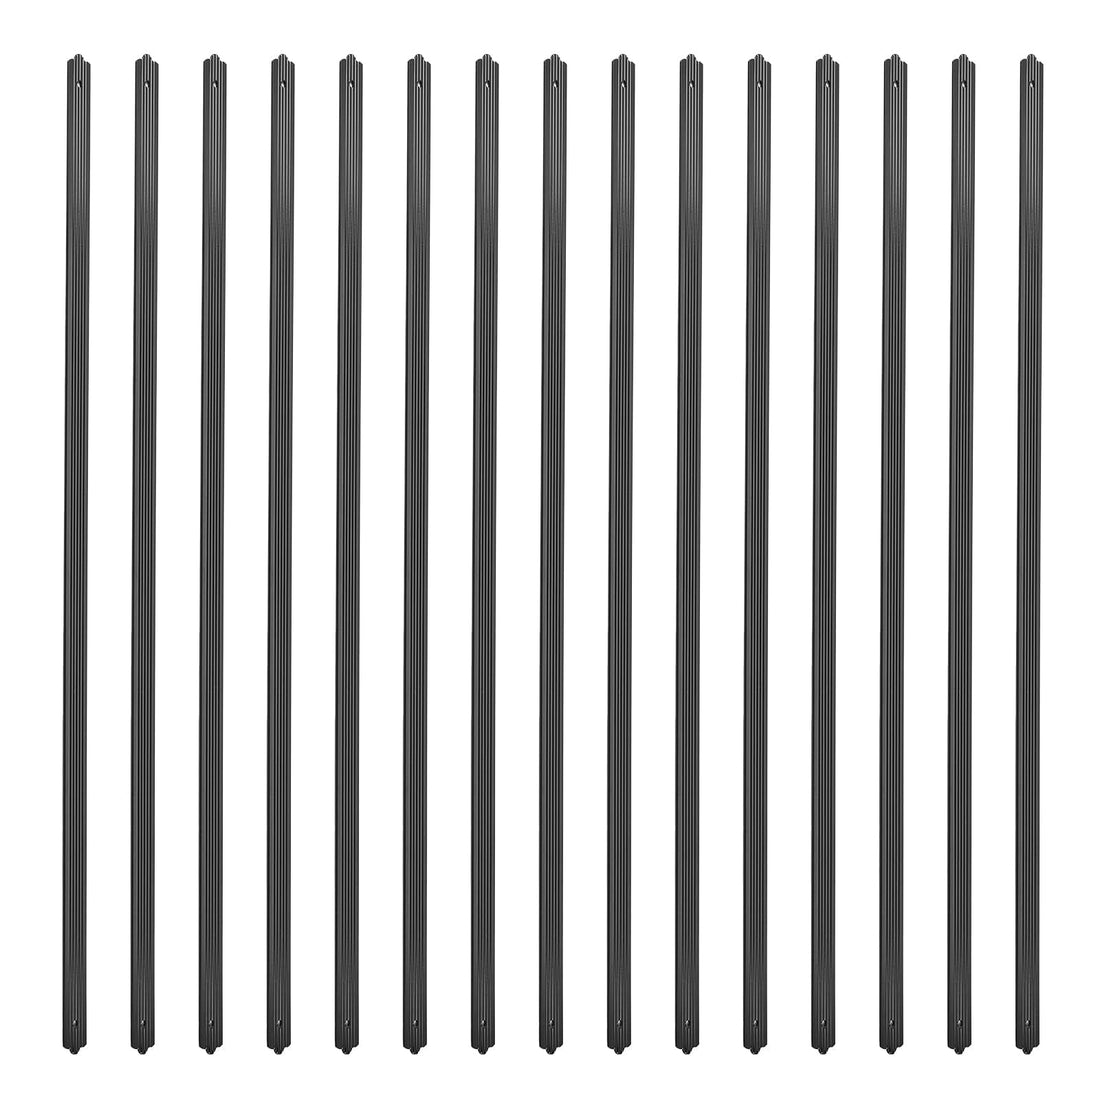 Aluminum Deck Balusters 32.25x1 Inch, Black, for Porch & Stairs